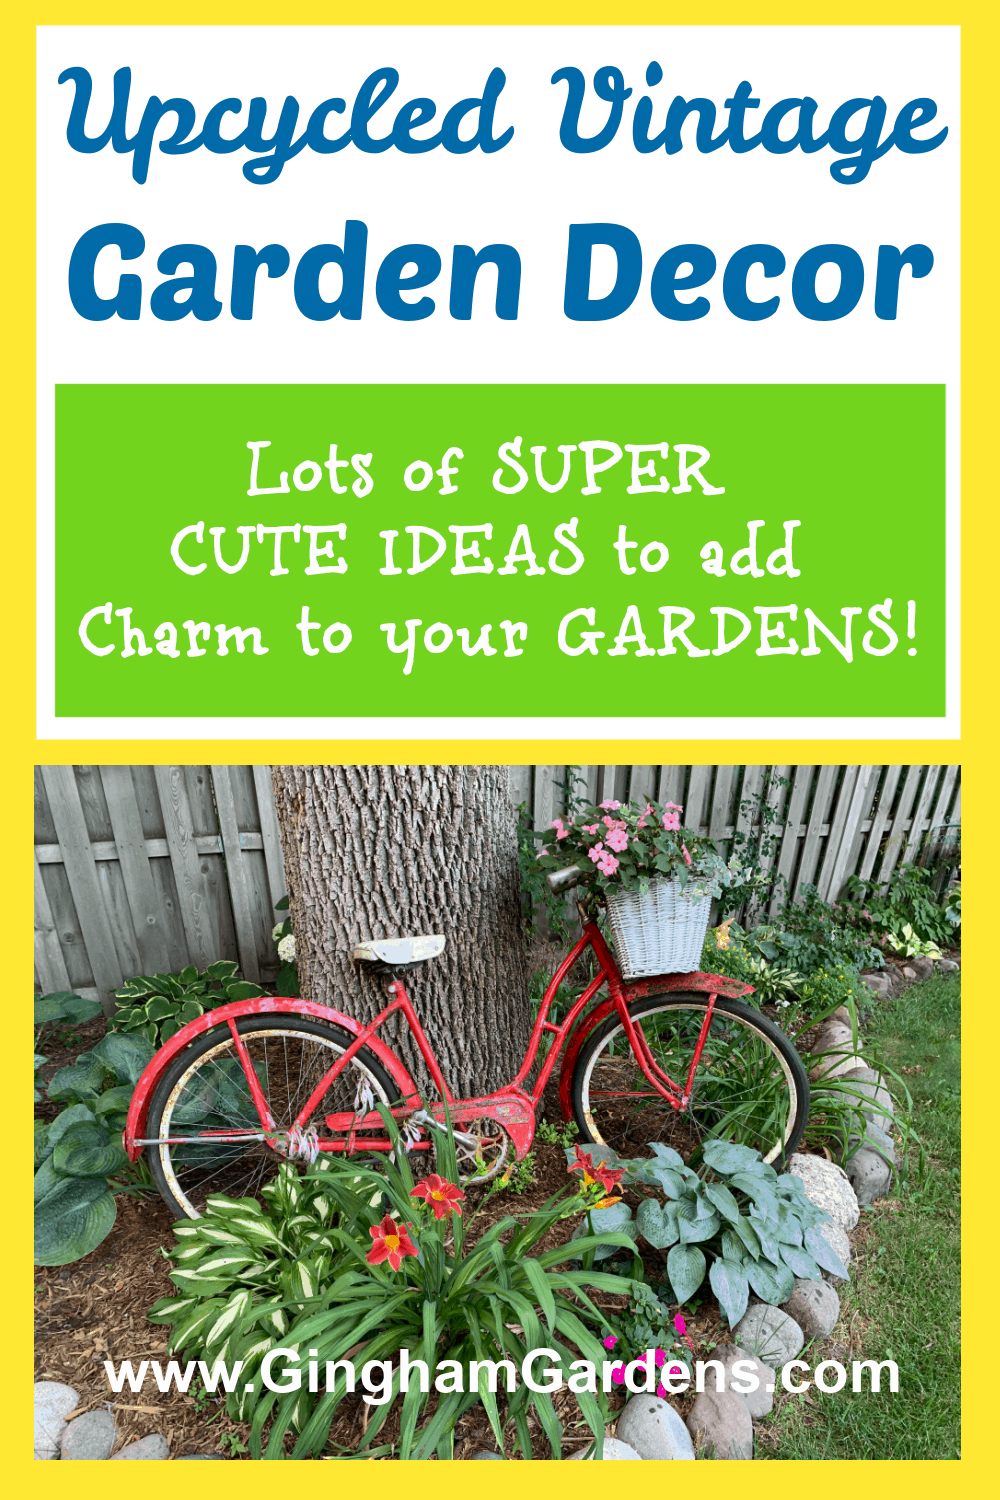 Image of a Bicycle in a Garden with text overlay - Upcycled Vintage Garden Decor